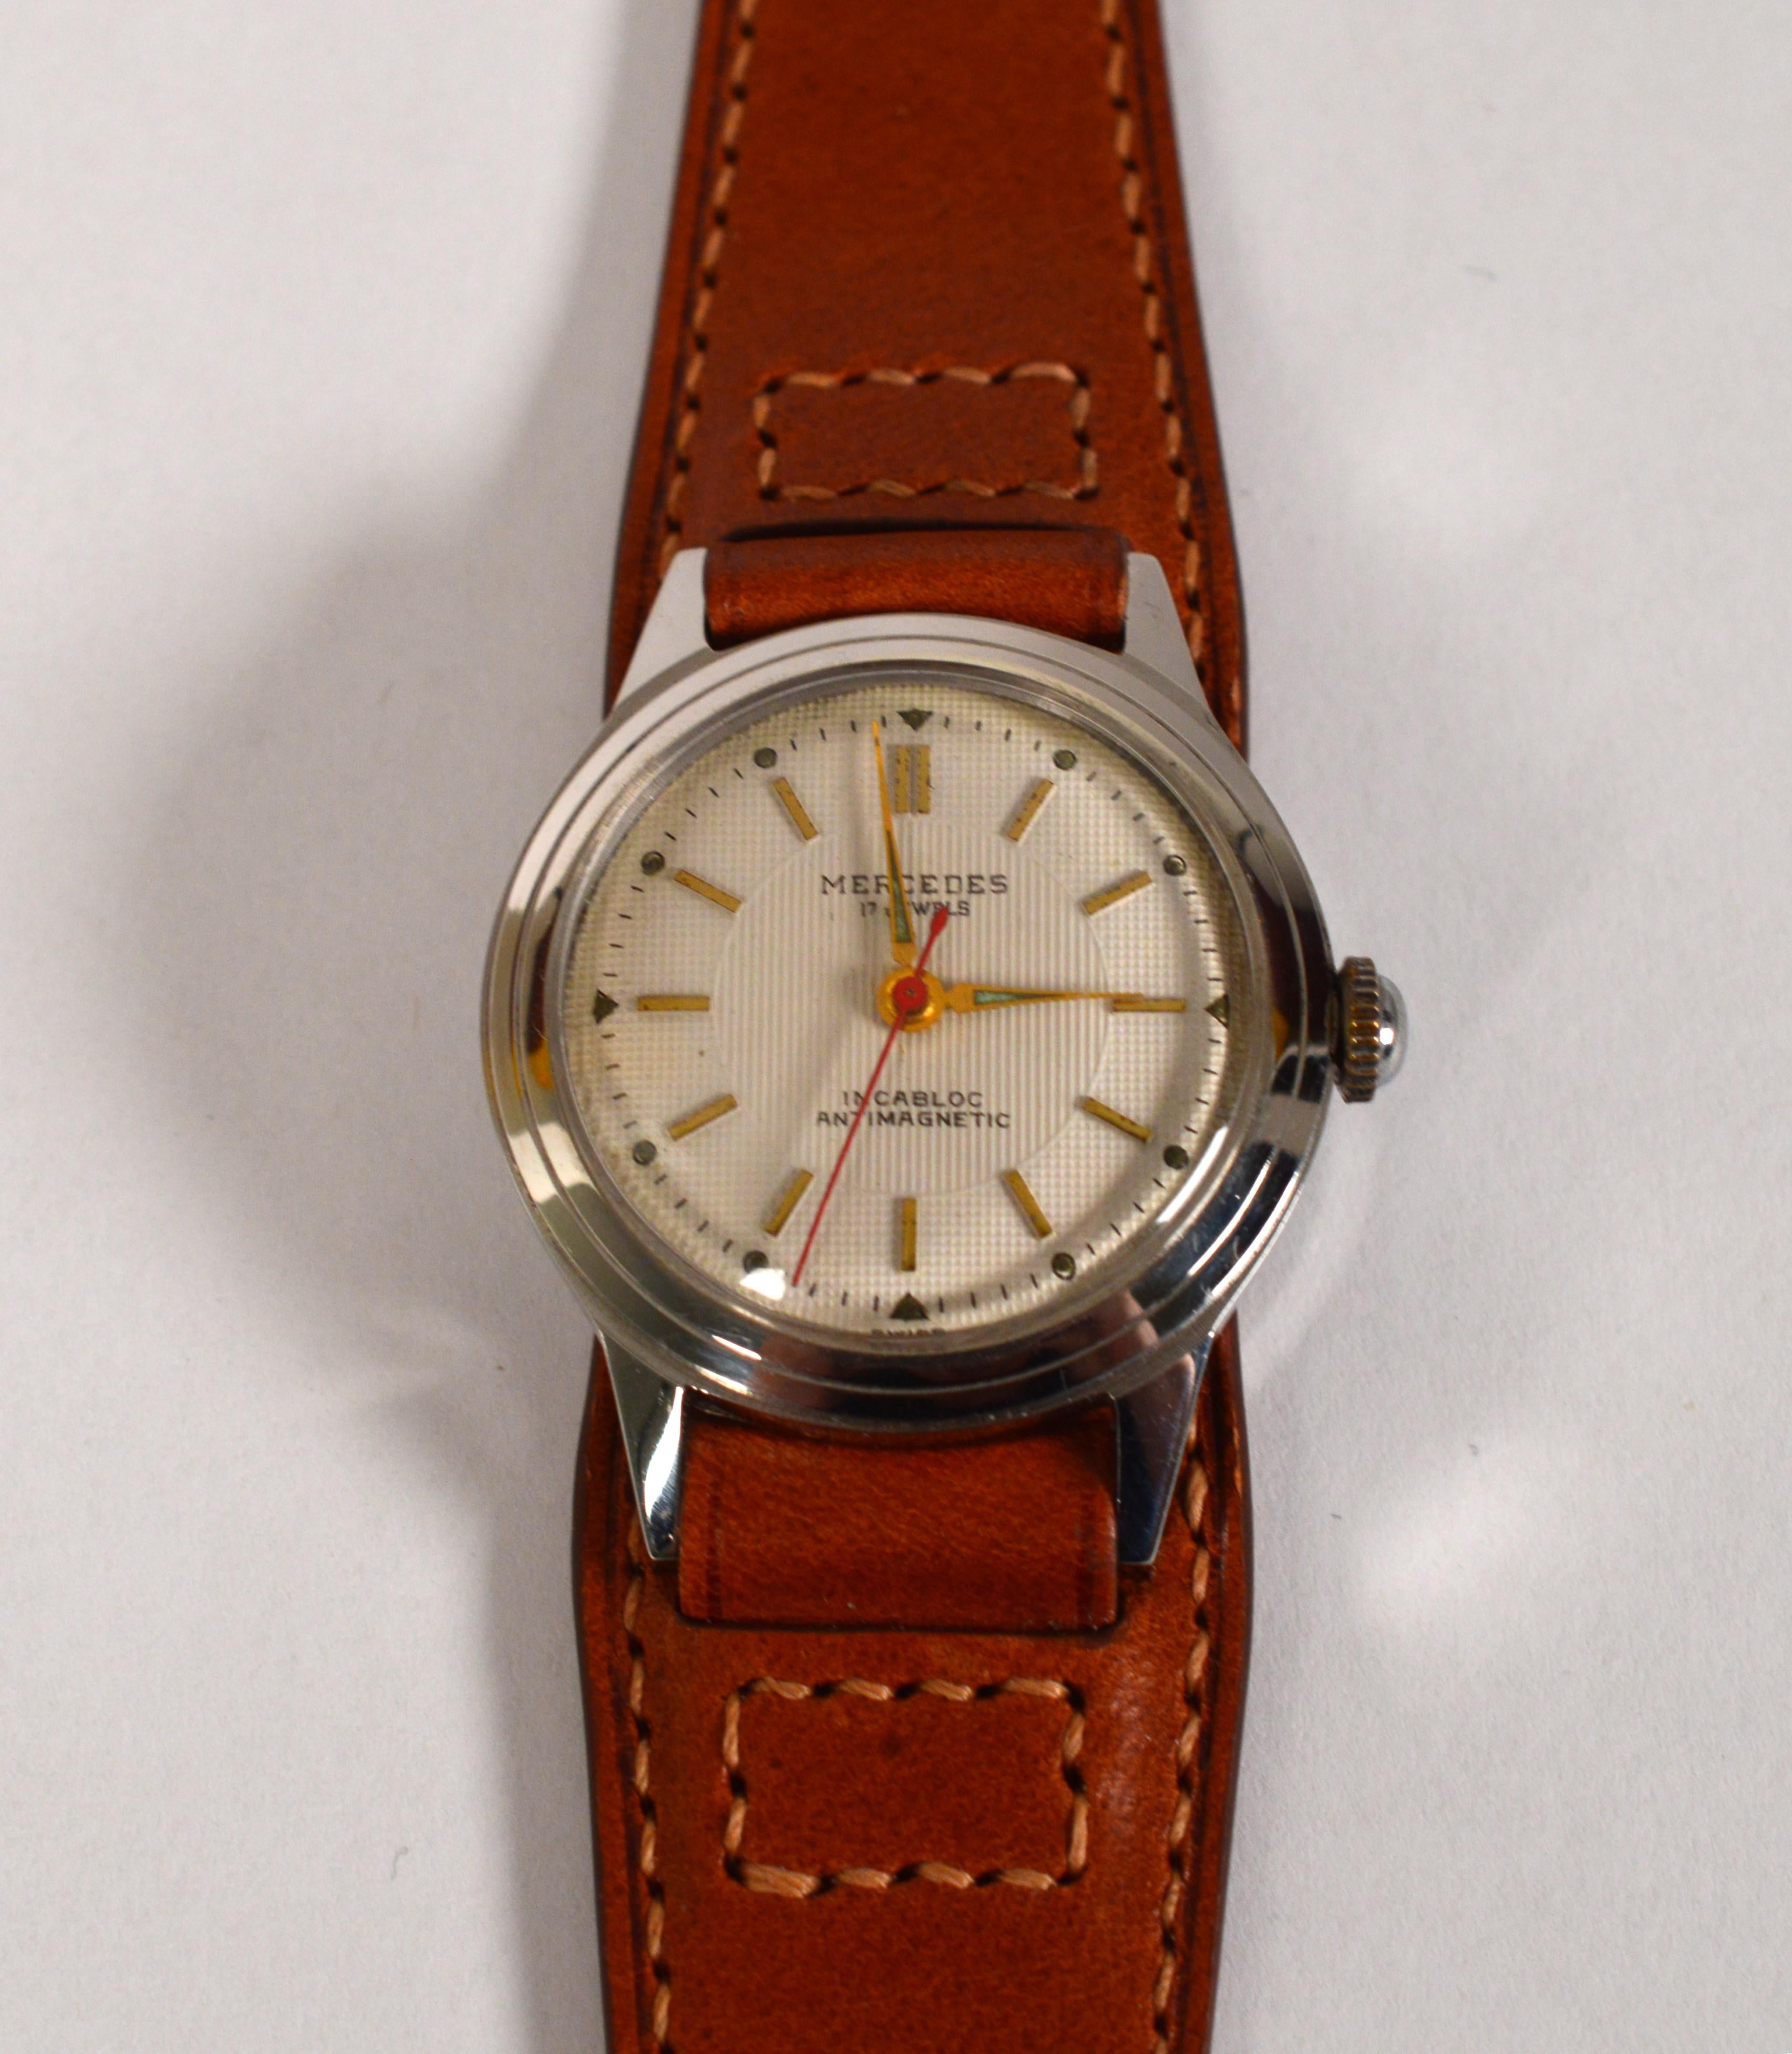 In mint condition, enjoy this post WWII Style Mercedes Winder 32mm Men's Wrist Watch. With a pristine linen face, the gold tone hands and matchstick indexes are sleek and easy to read with the red second hand as a nice compliment. This Mercedes has 